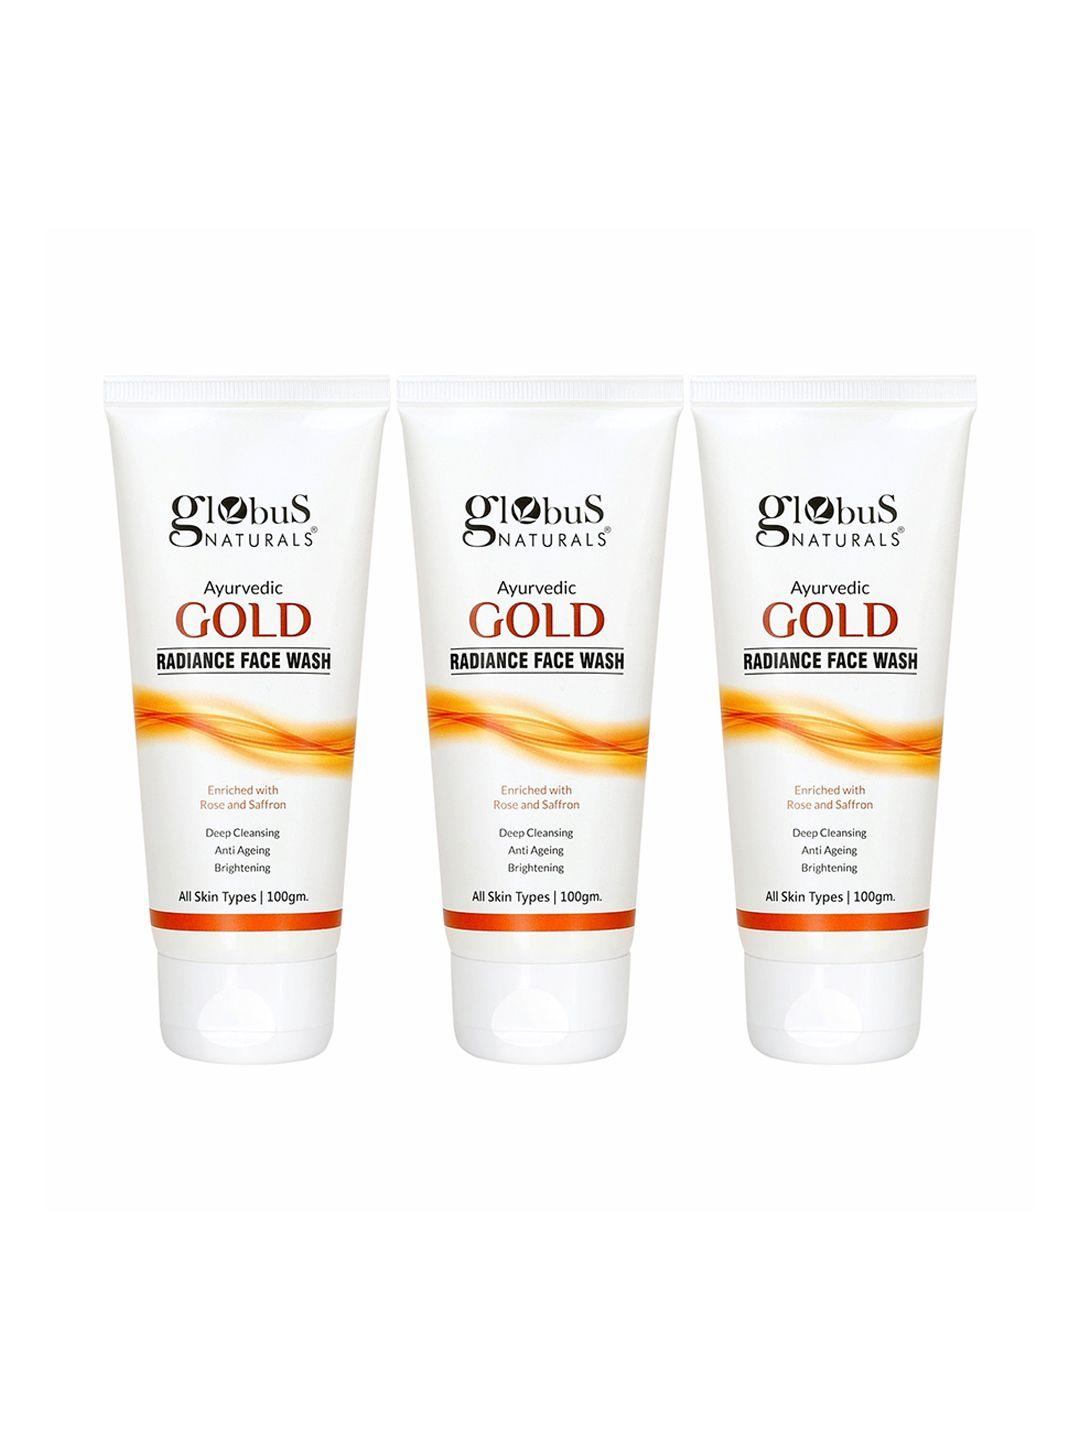 globus naturals set of 3 gold radiance anti ageing & brightening face wash 100 gm each